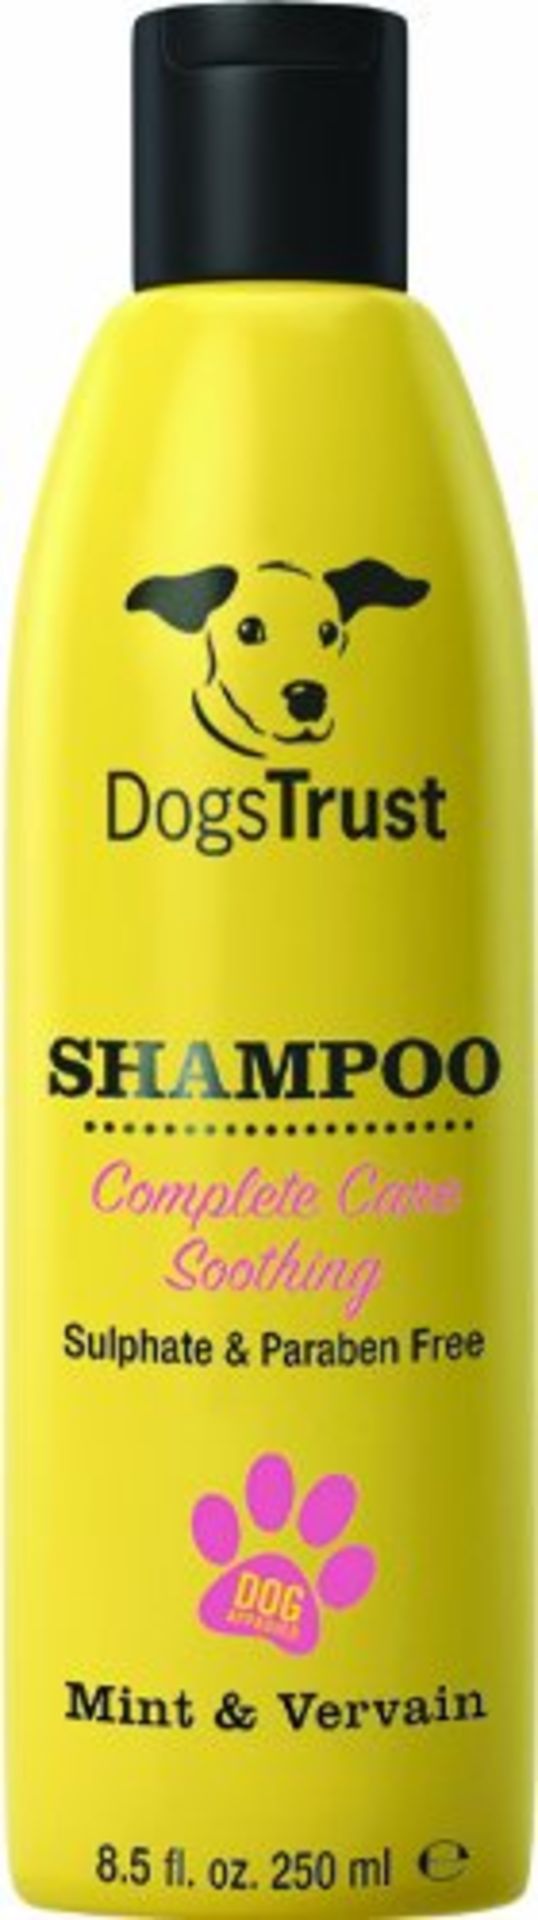 60 x Various Dogs Trust Shampoos and Conditioners - Brand New Stock - CL028 - Includes No Tears, - Image 13 of 16